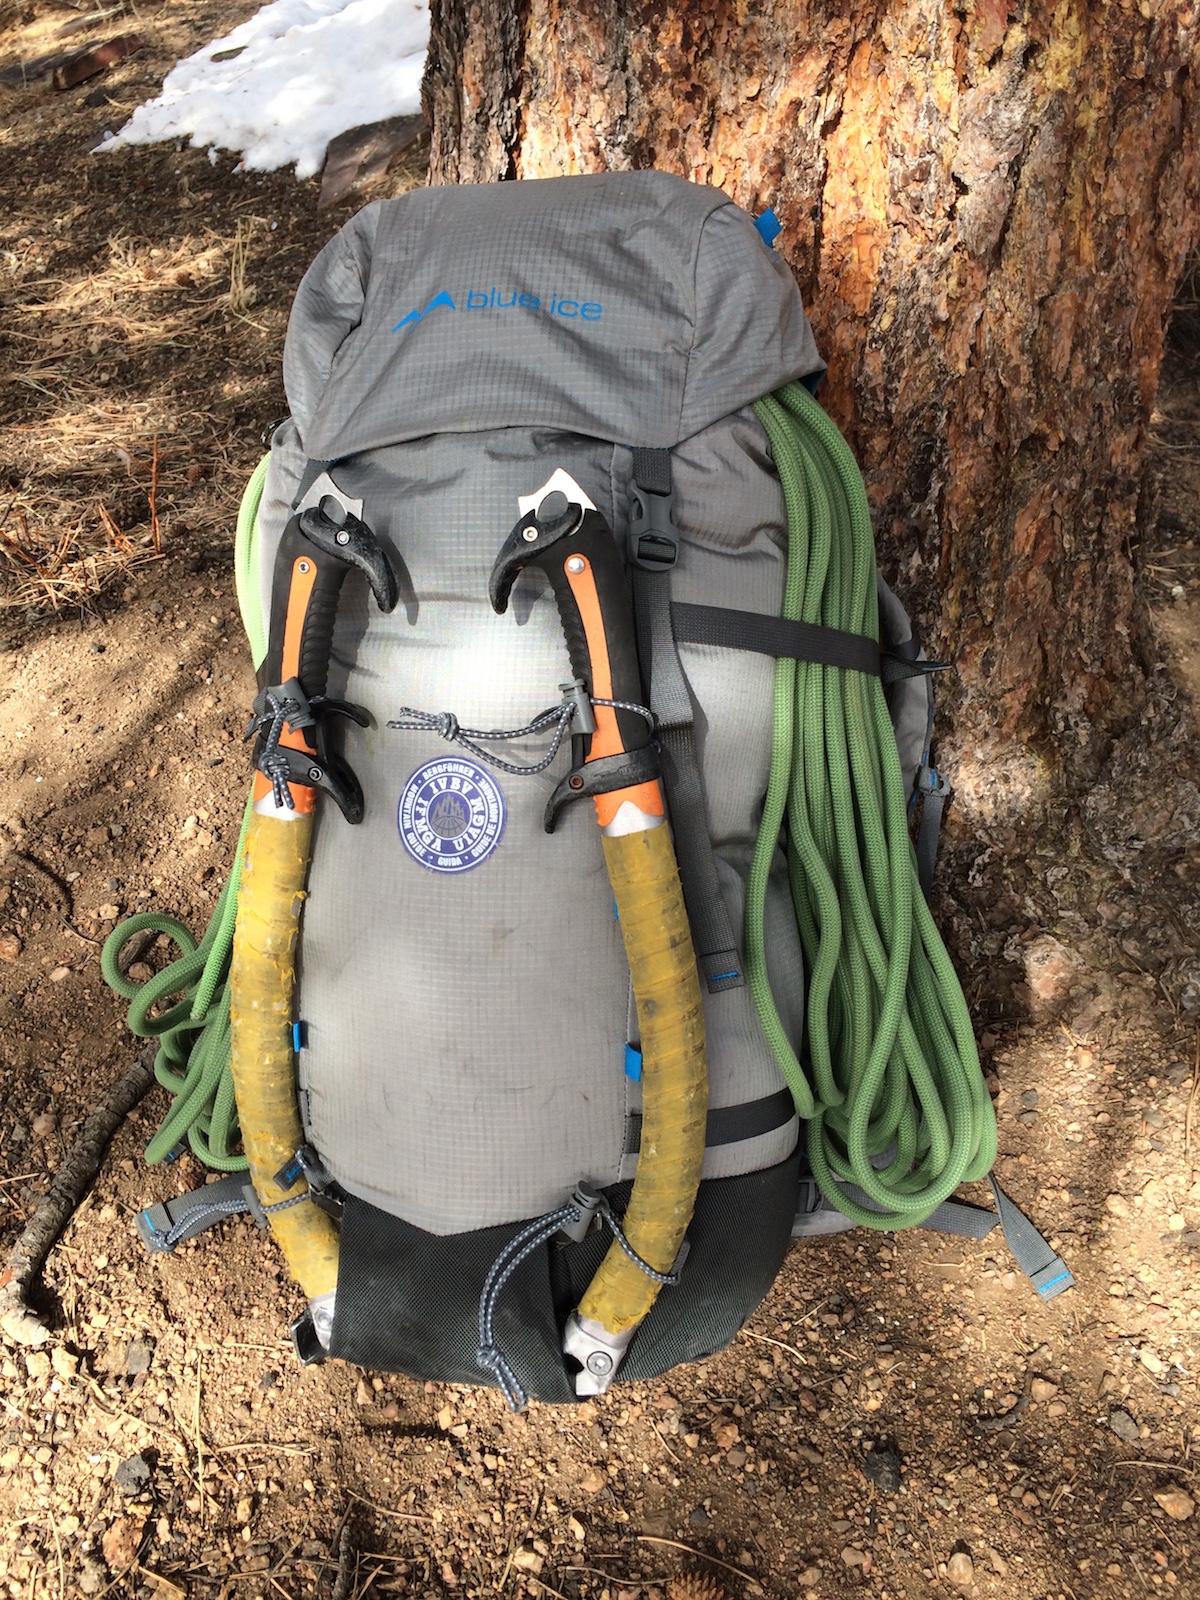 The Yeti 50L pack shown carrying two ice tools and a rope. The ice tools are held by bungee cords with plastic toggles. [Photo] Mike Lewis